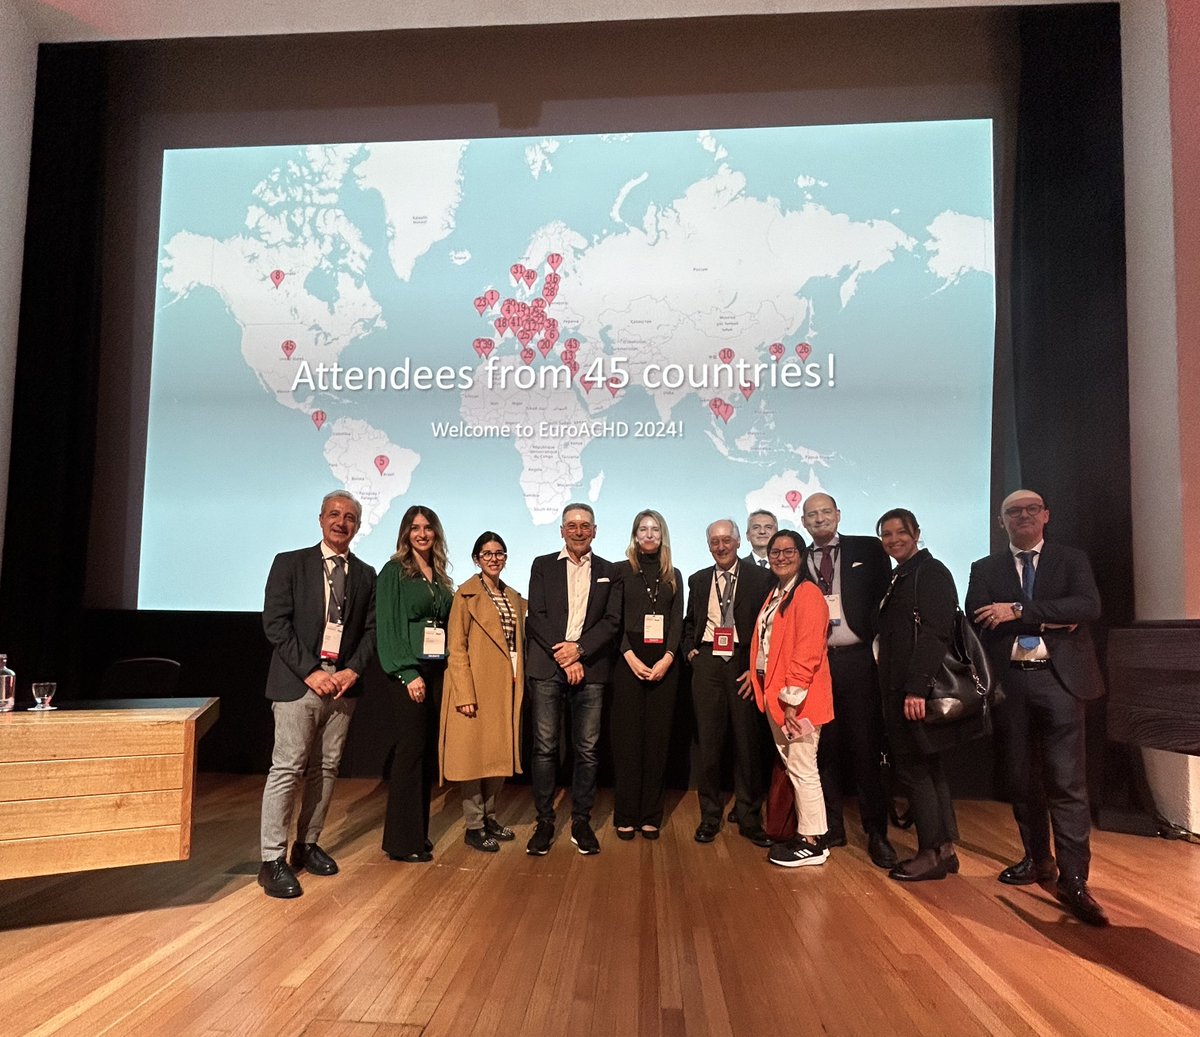 A glimpse from the joint session #EuroACHD2024! Insights from the 15th European Meeting on ACHD will echo in our efforts to improve patient lives. #Cardiology #ACHD #EuroACHD15